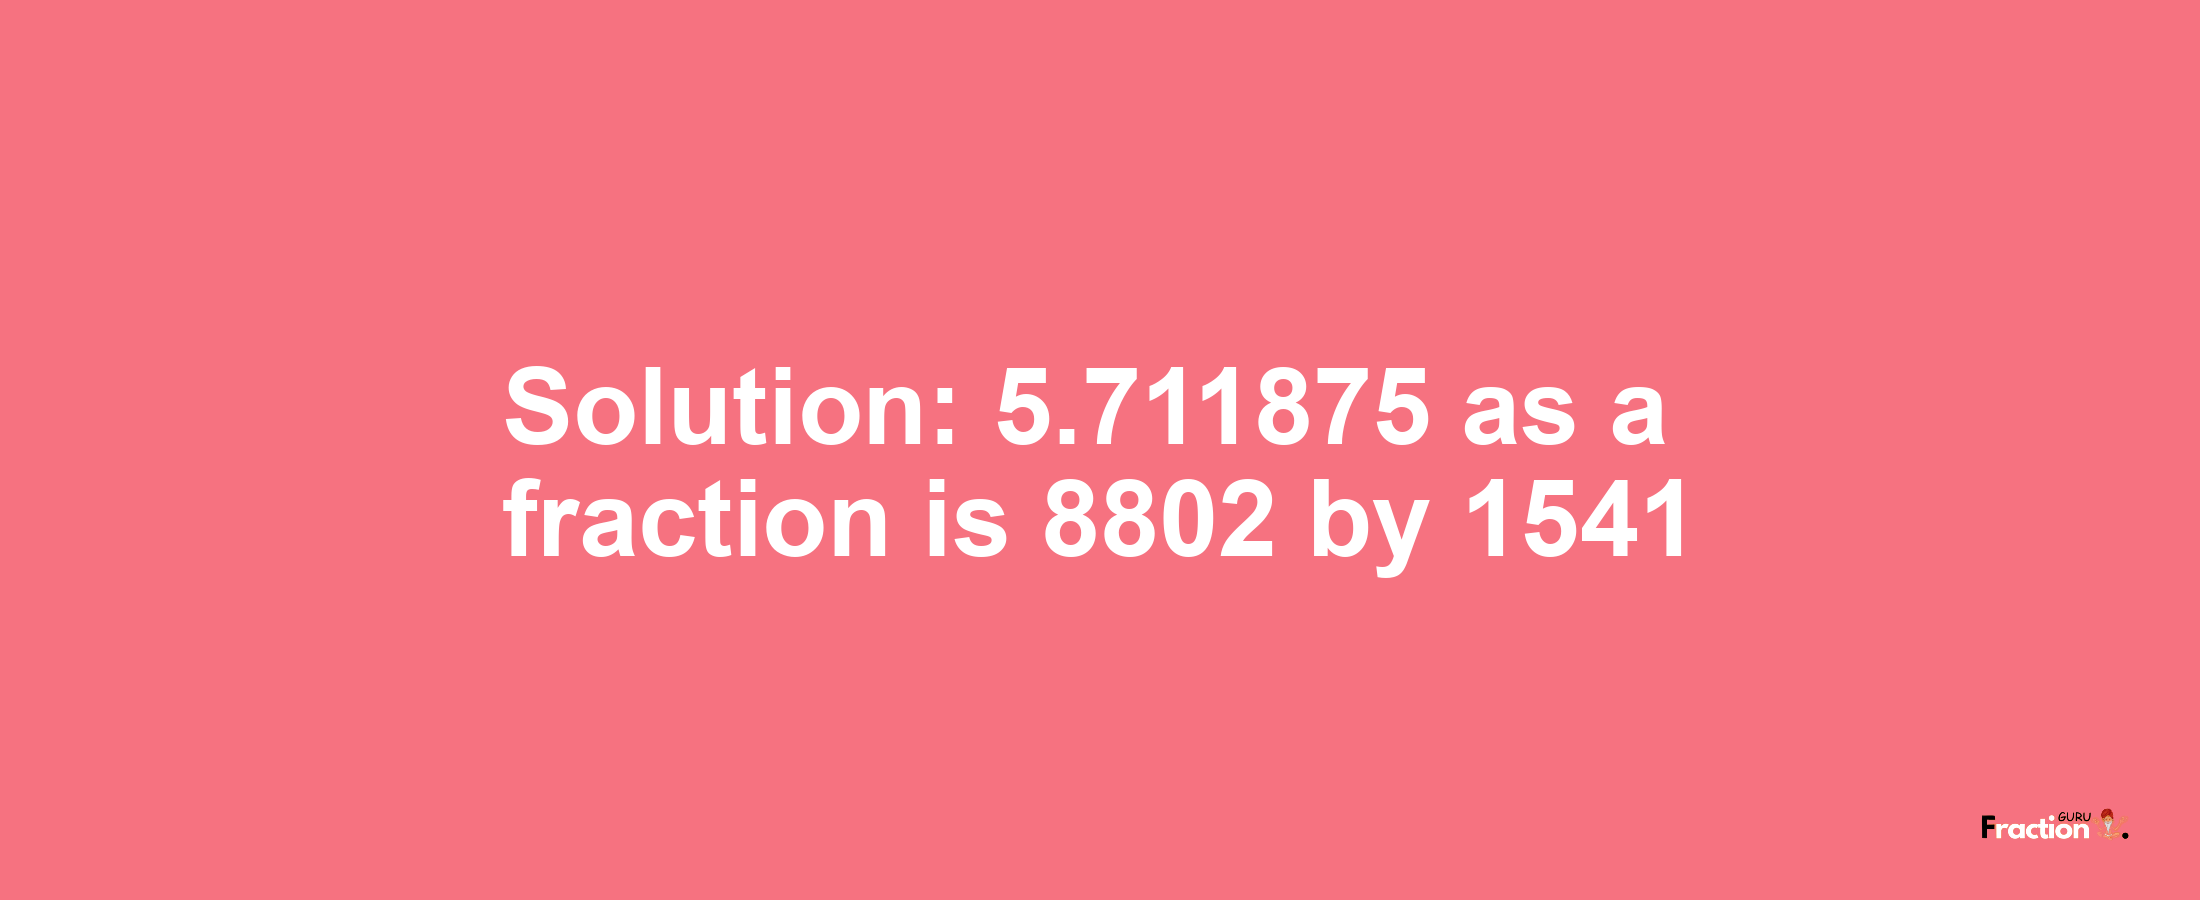 Solution:5.711875 as a fraction is 8802/1541